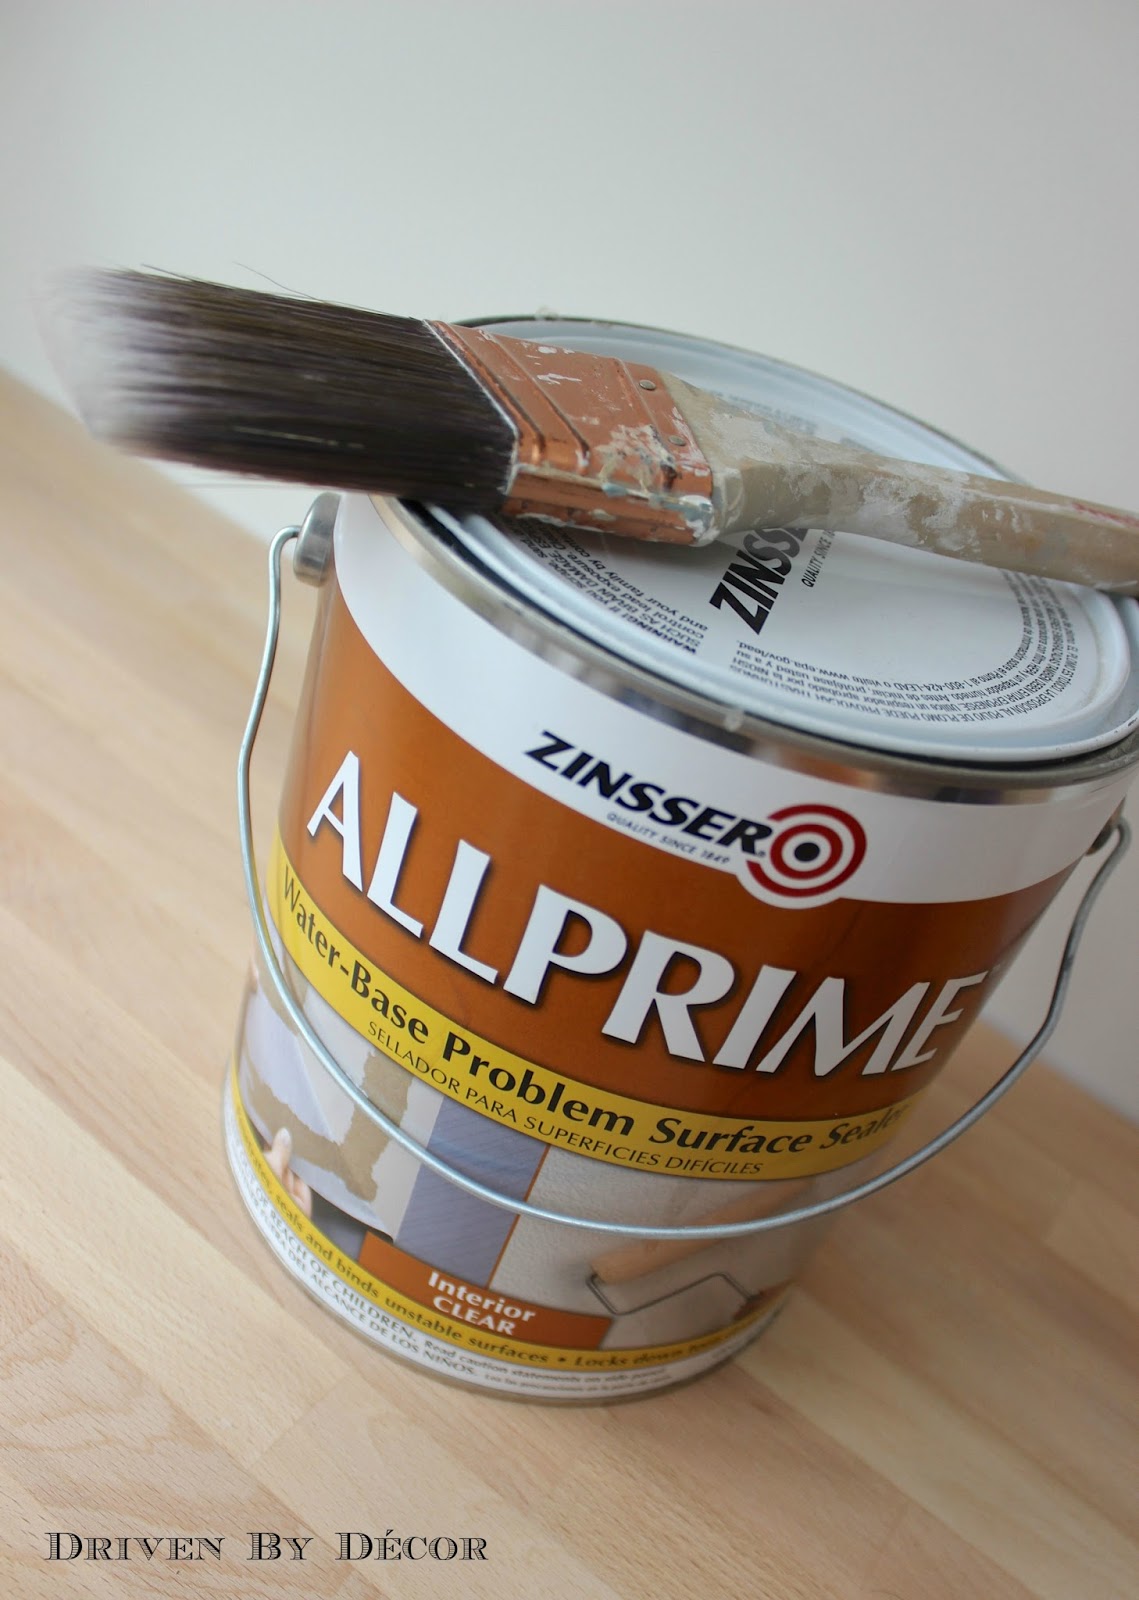 Painting Over Wallpaper Glue: Do This First! - Driven by Decor